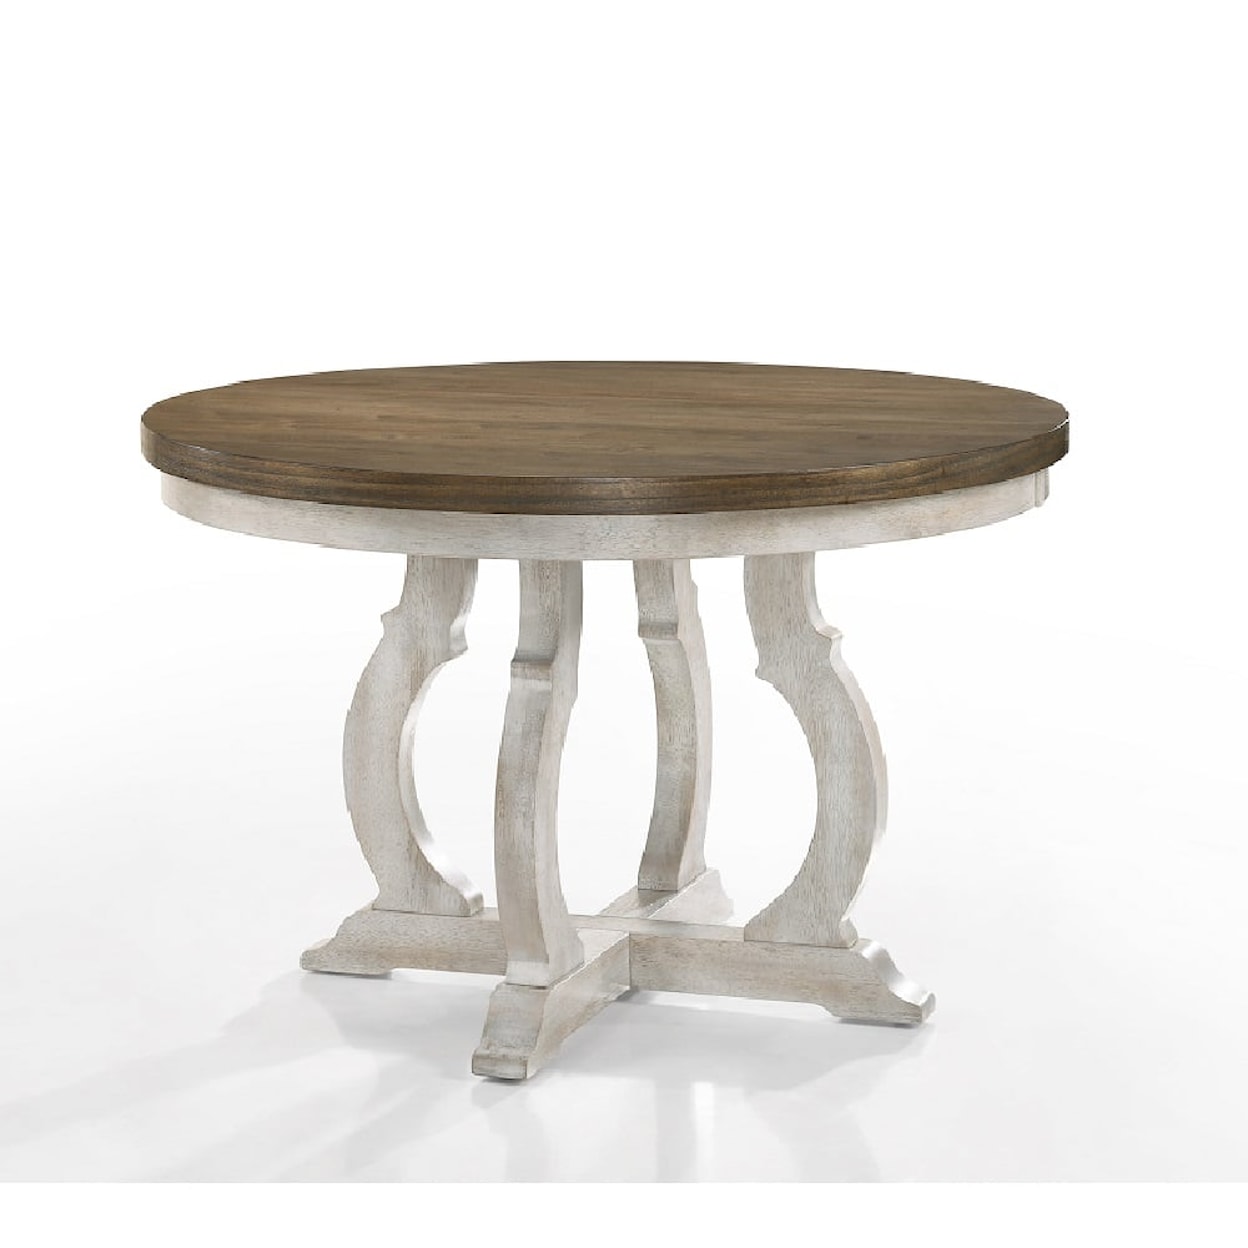 Acme Furniture Cillin Round Dining Table